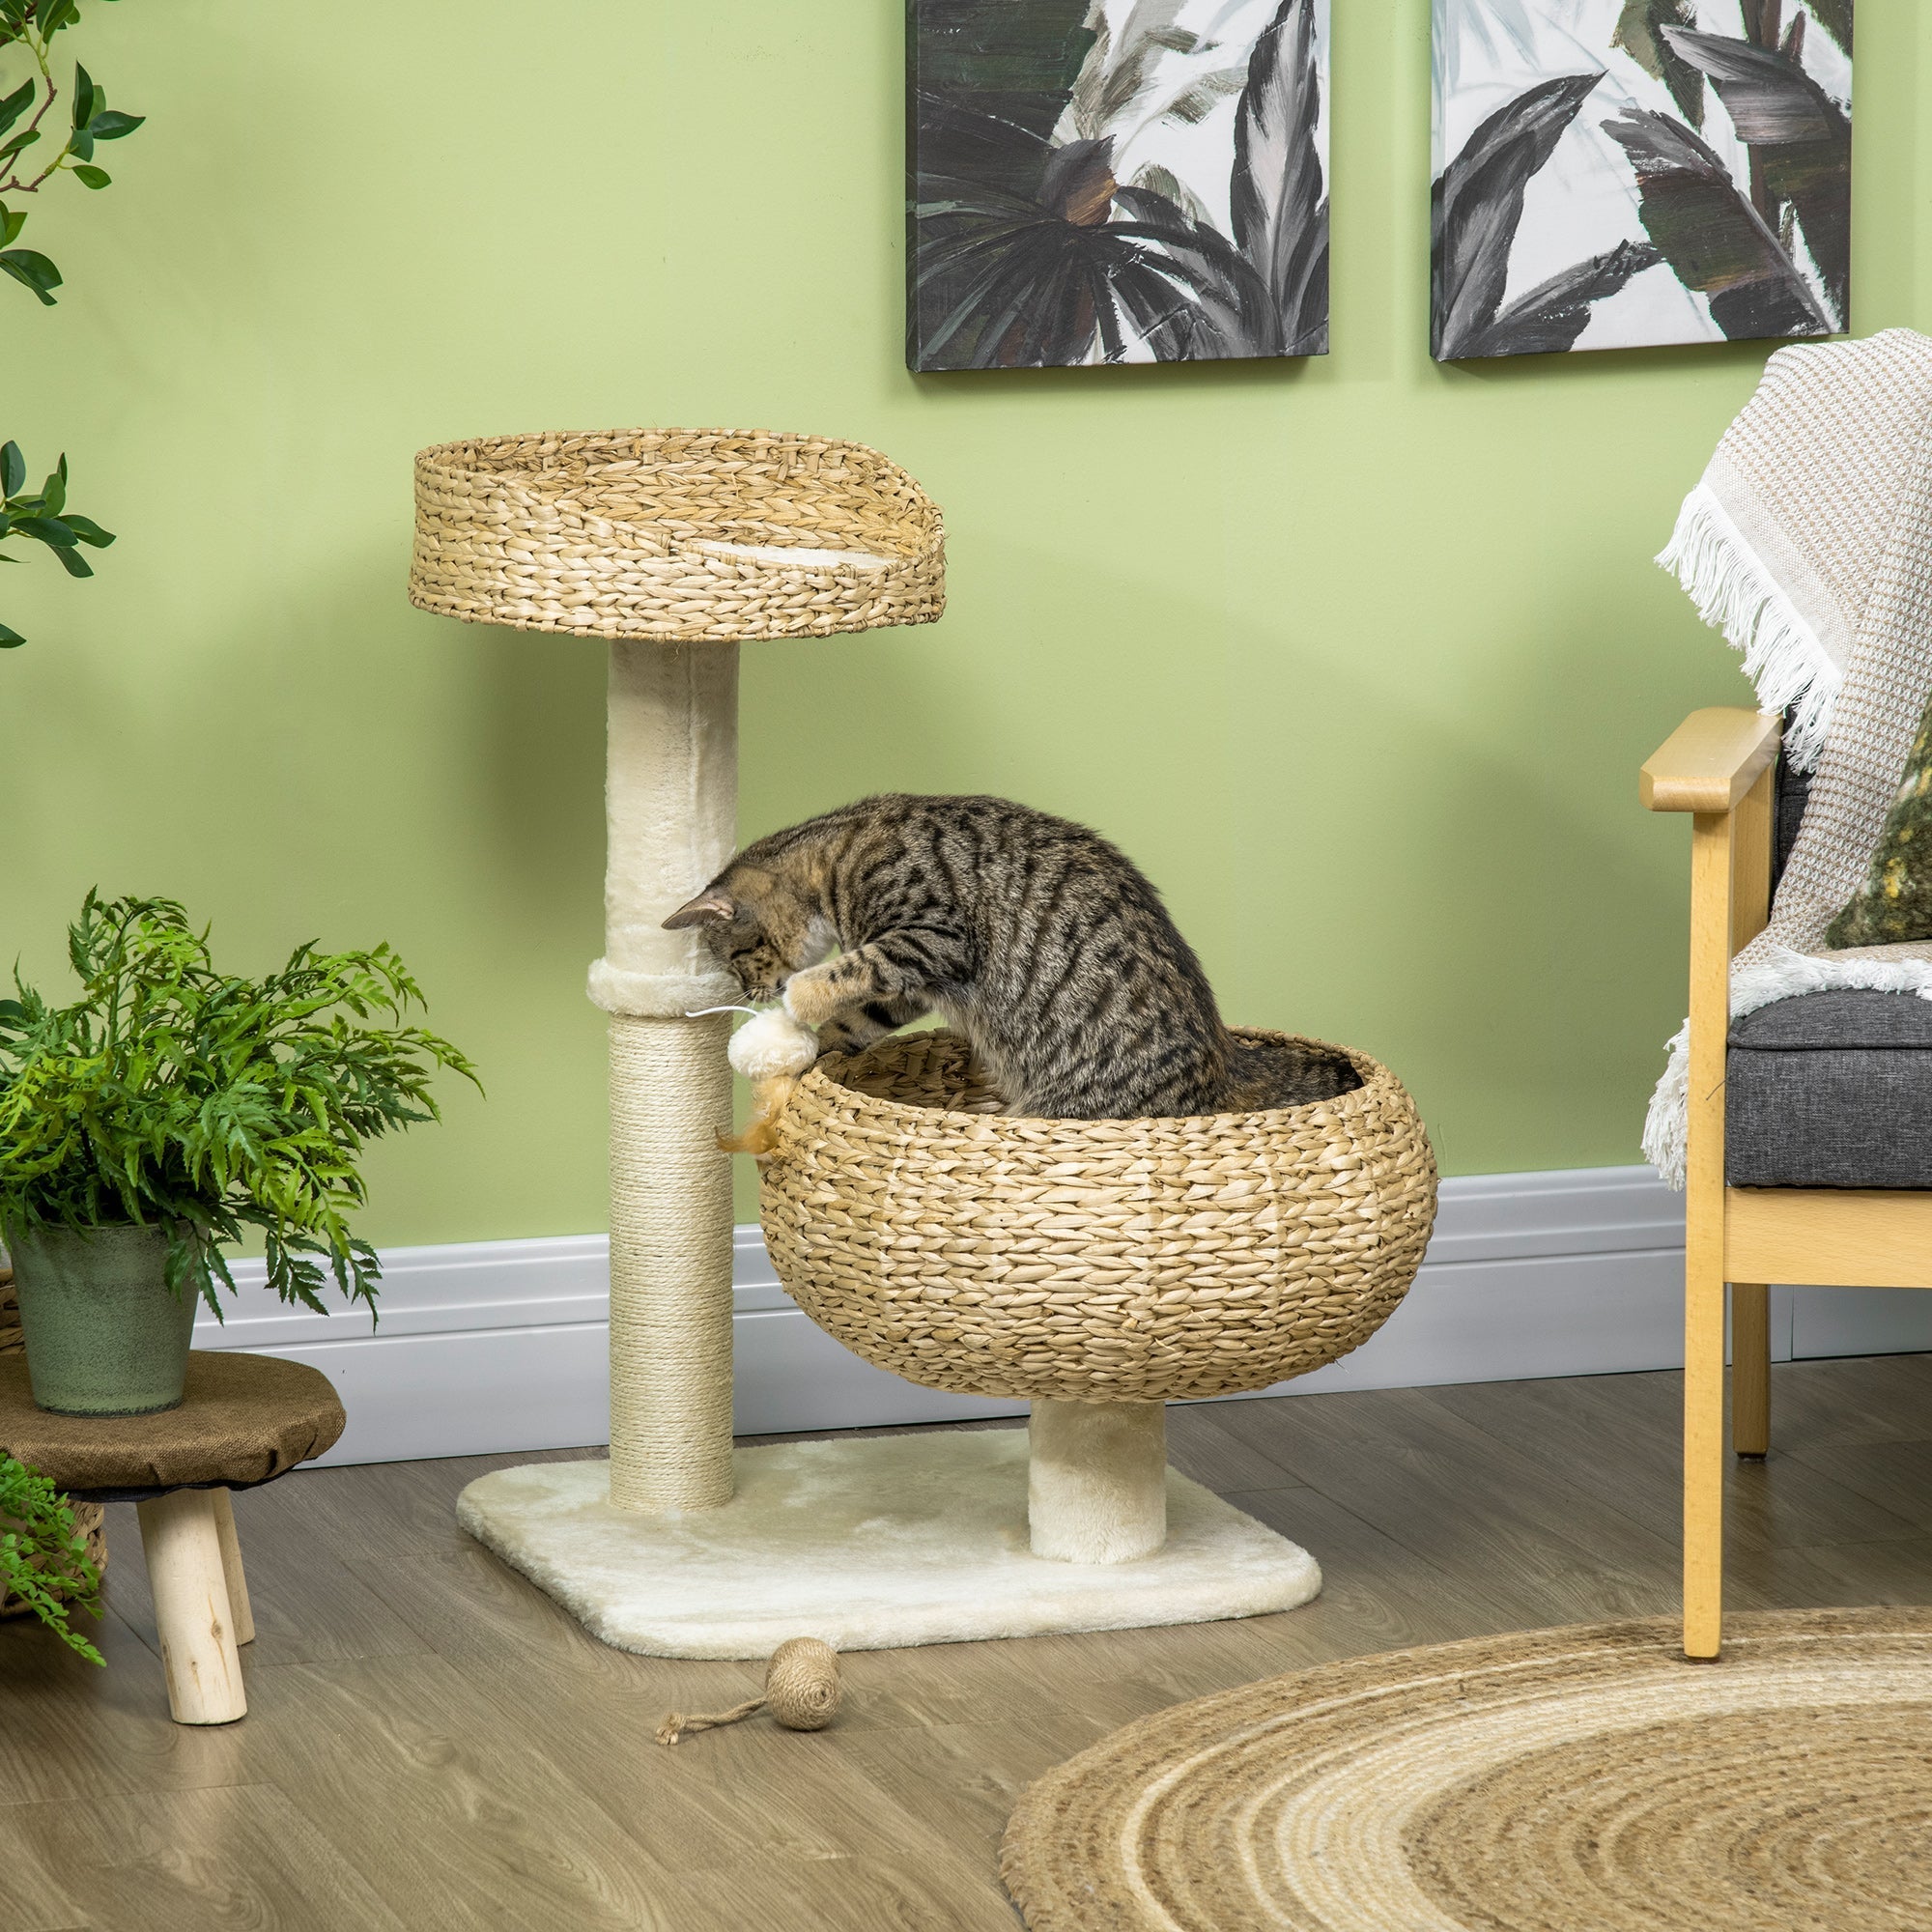 72cm Cat Tree Kitten Tower, with Sisal Scratching Post, Two Beds, Toy Ball, PawHut,